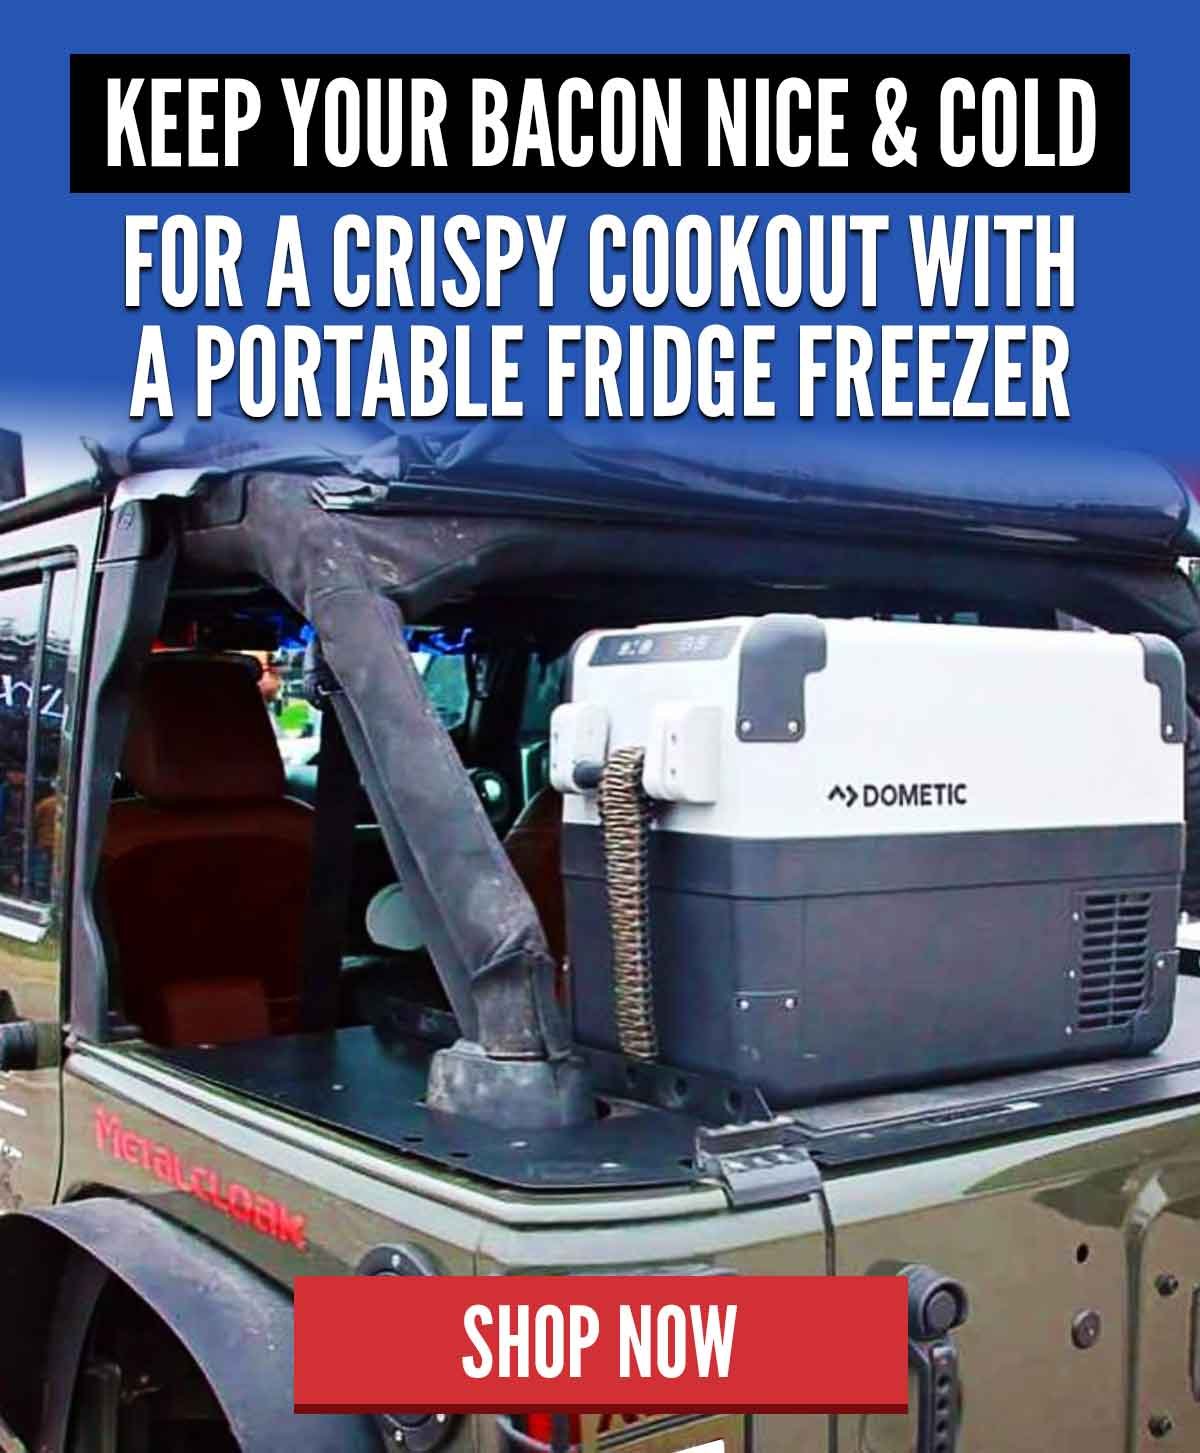 Keep Your Bacon Nice and Cold For a Crispy Cookout with a portable fridge freezer